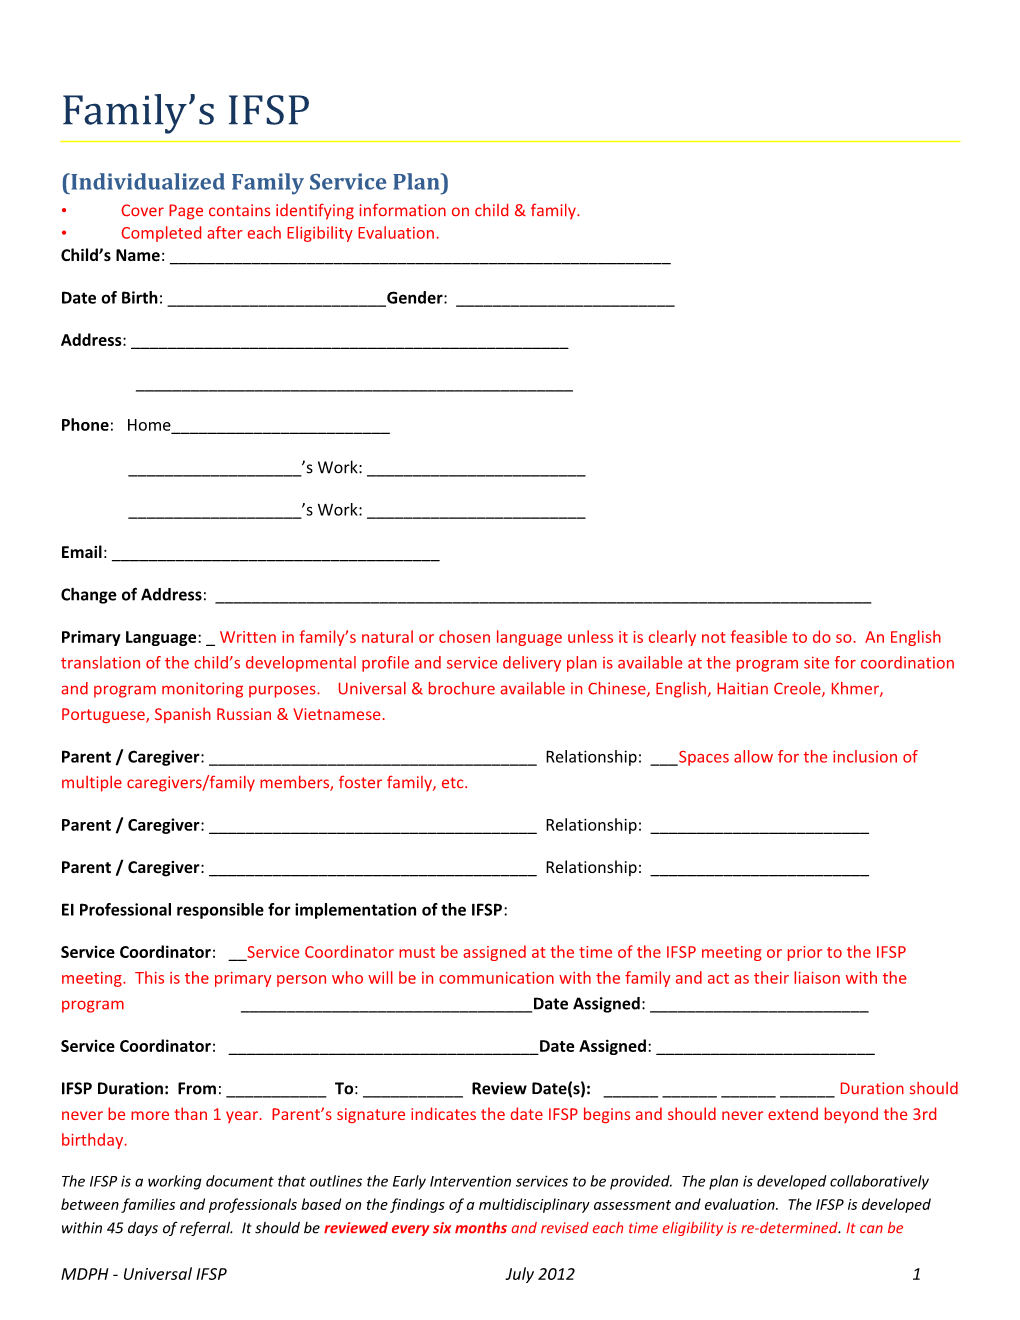 Individualized Family Service Plan